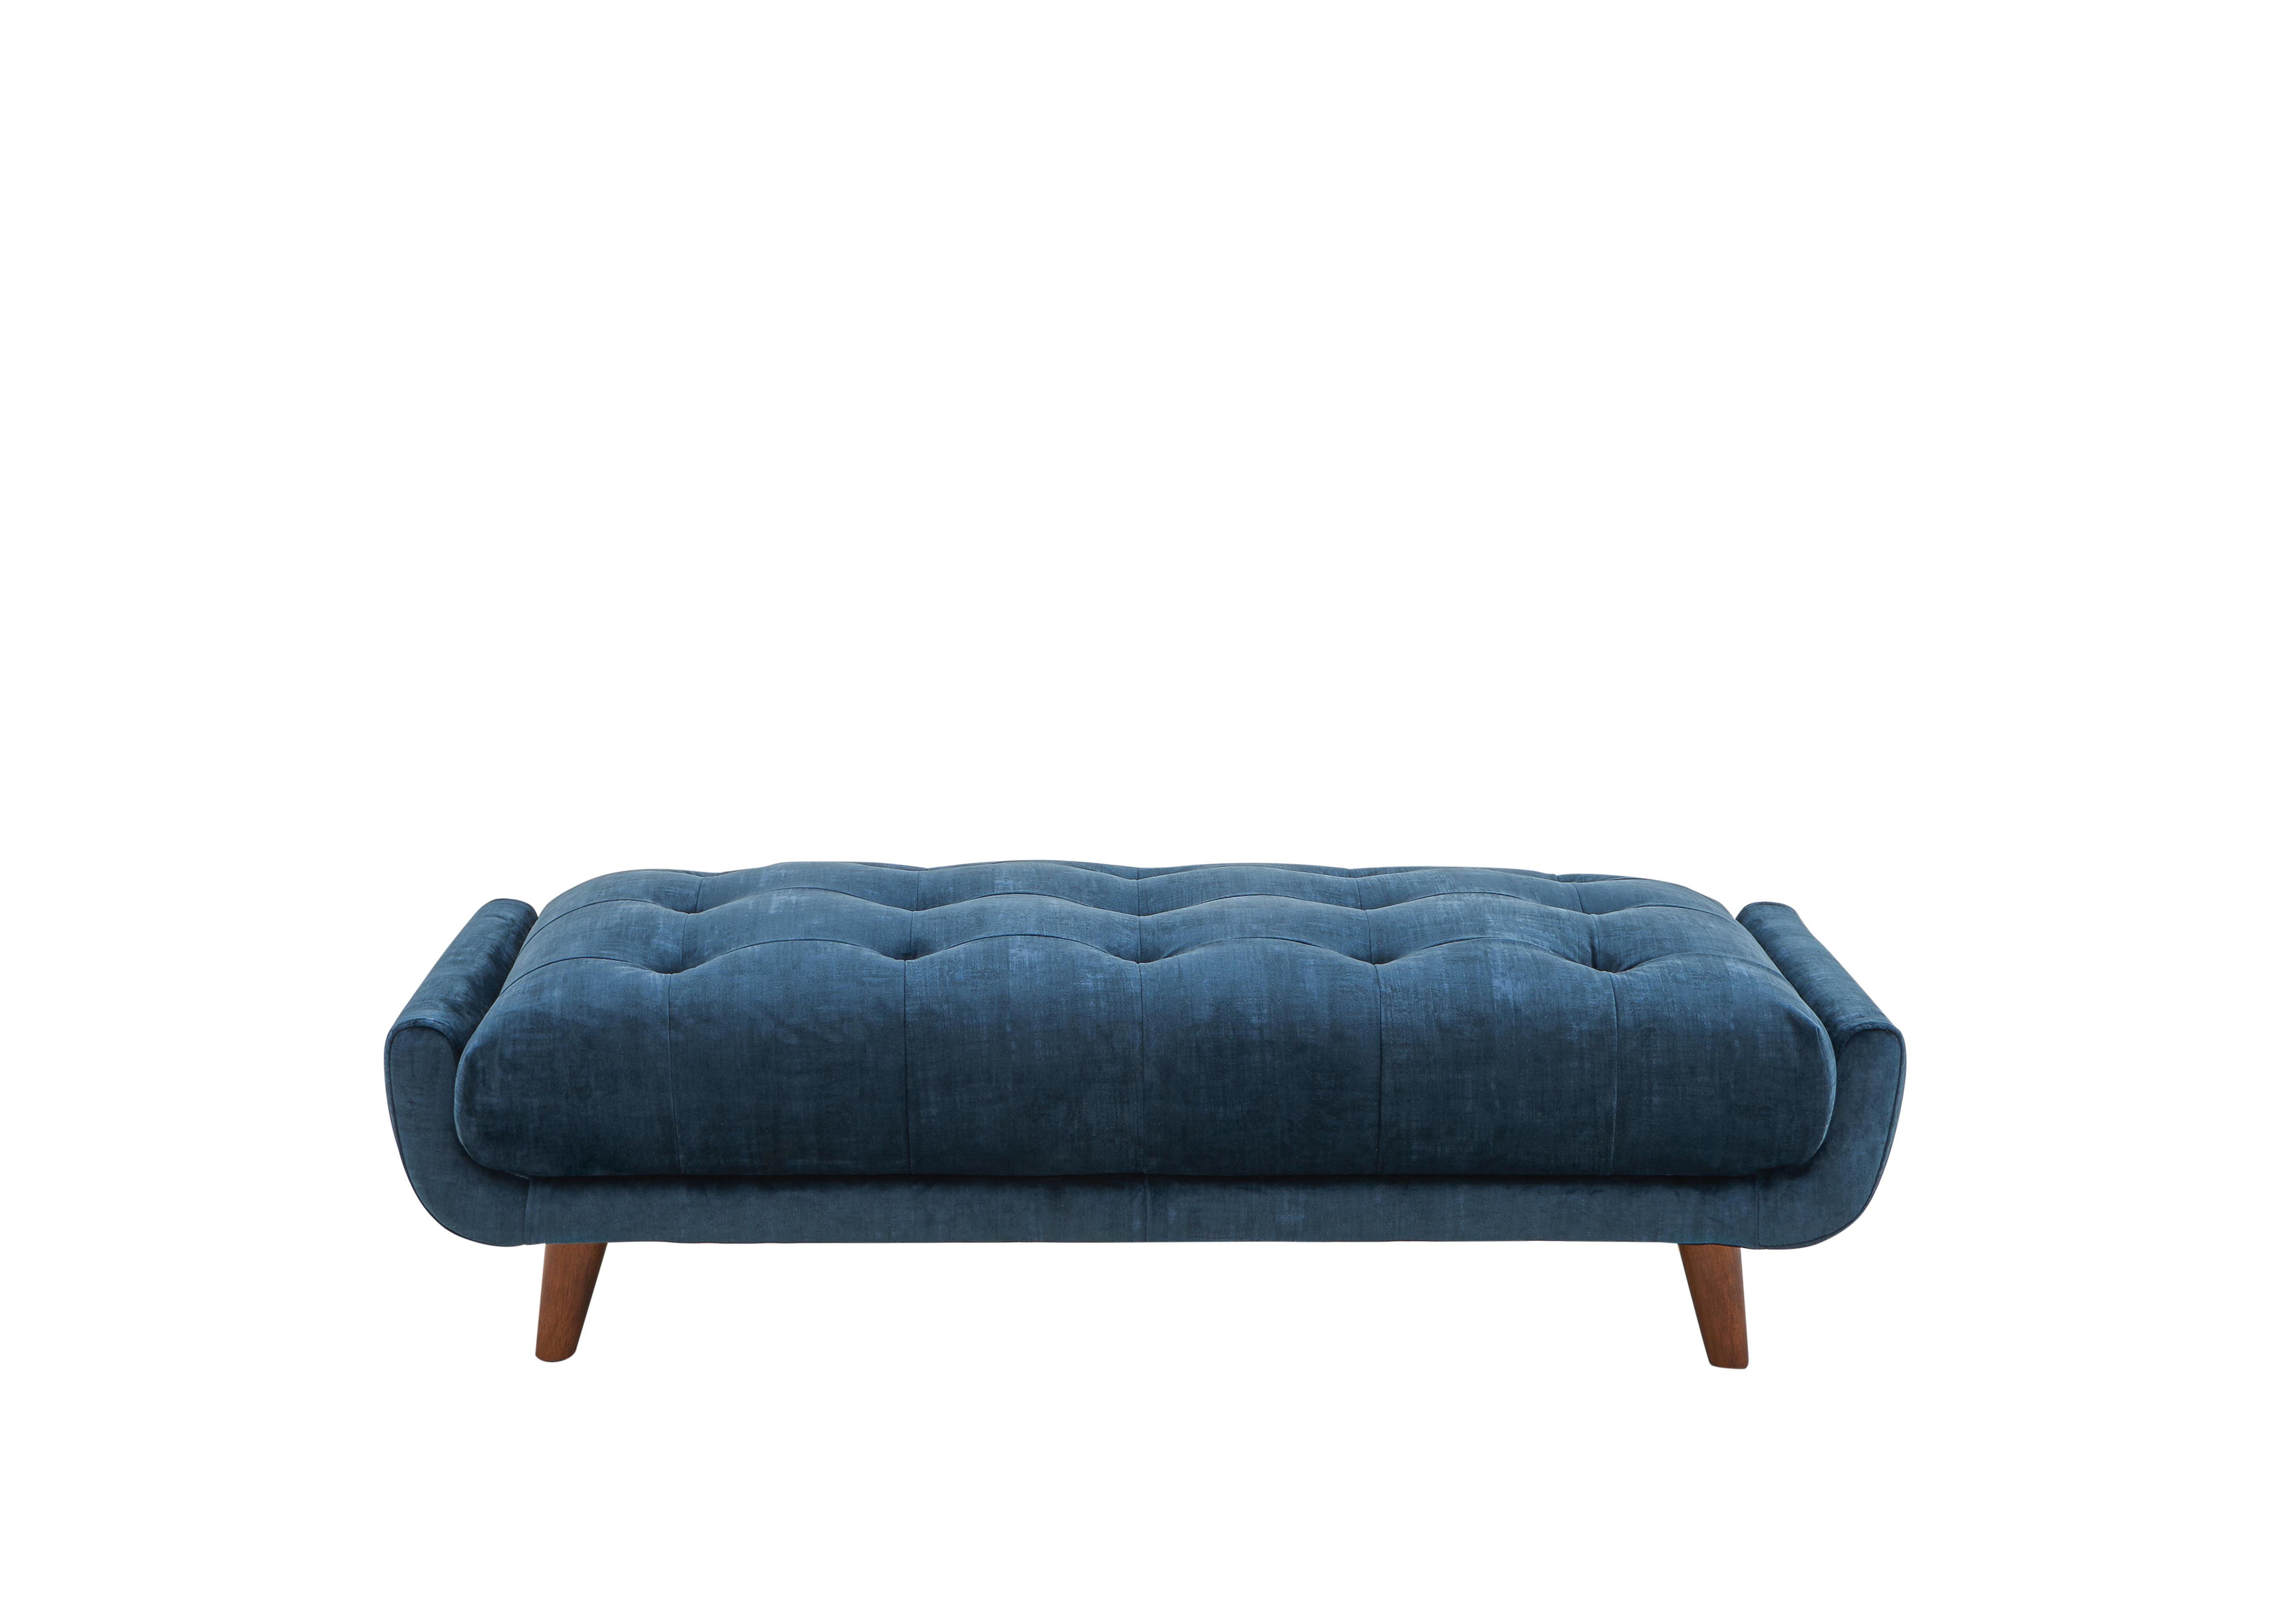 Rene Large Fabric Footstool in 52000 Heritage Airforce Wa Ft on Furniture Village